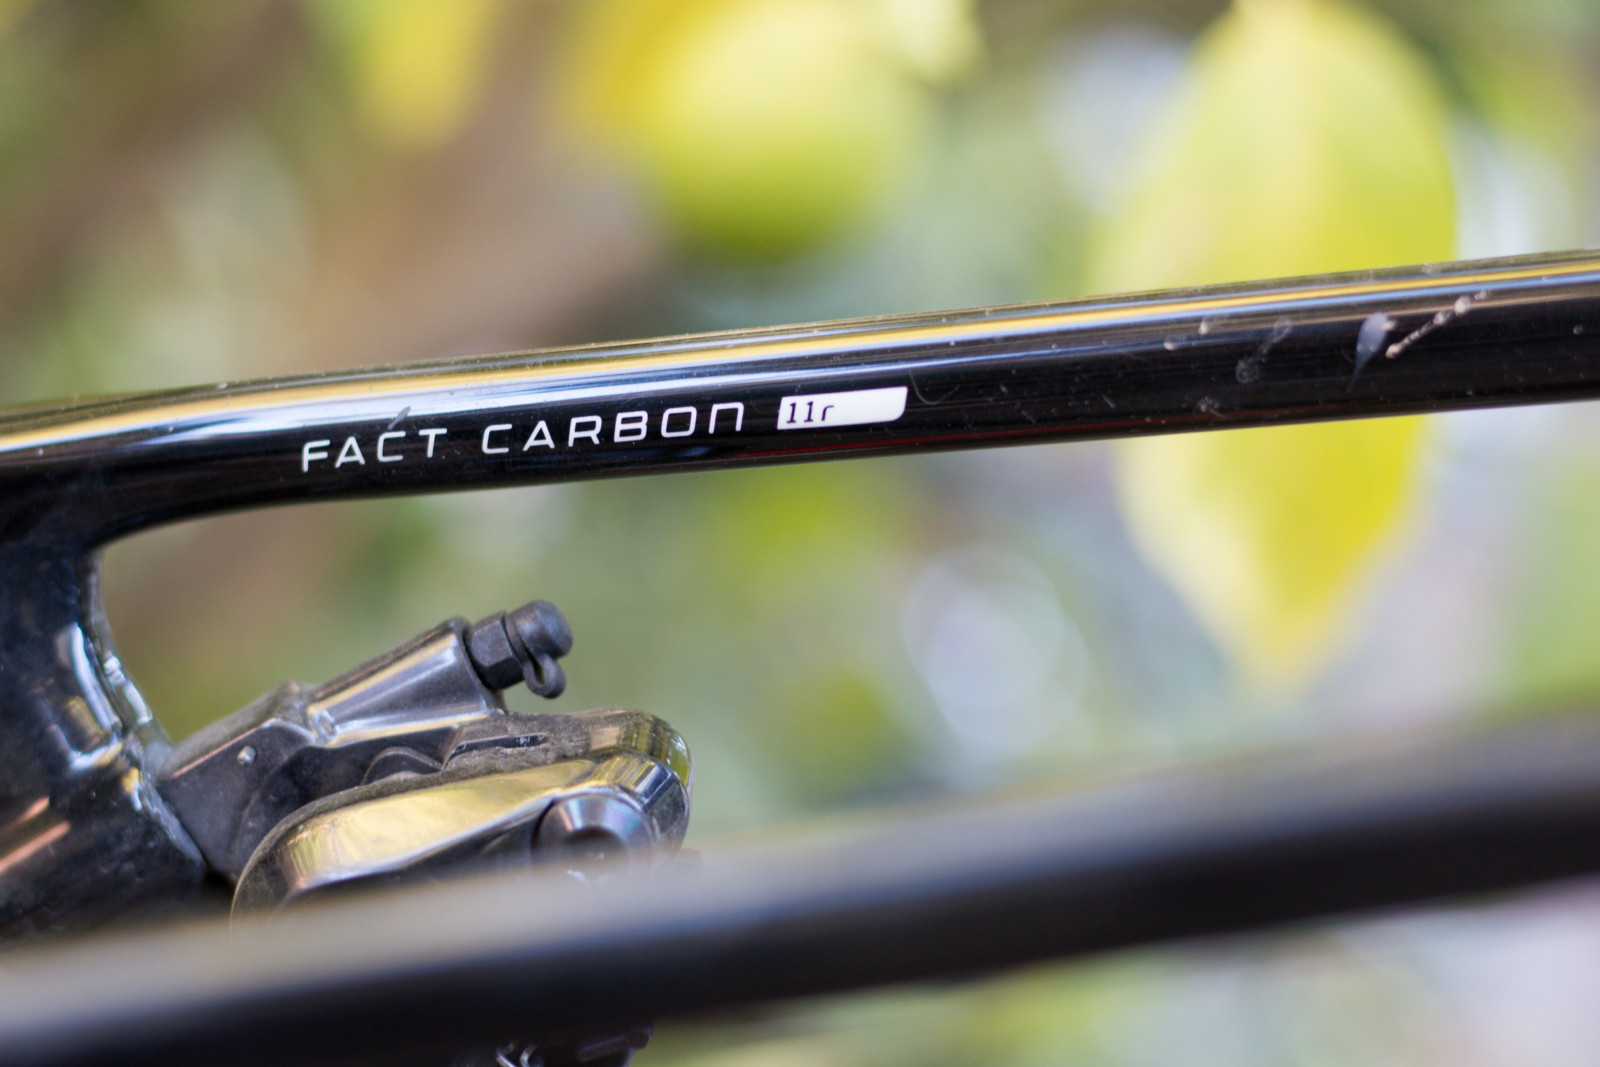 specialized fact 11r carbon